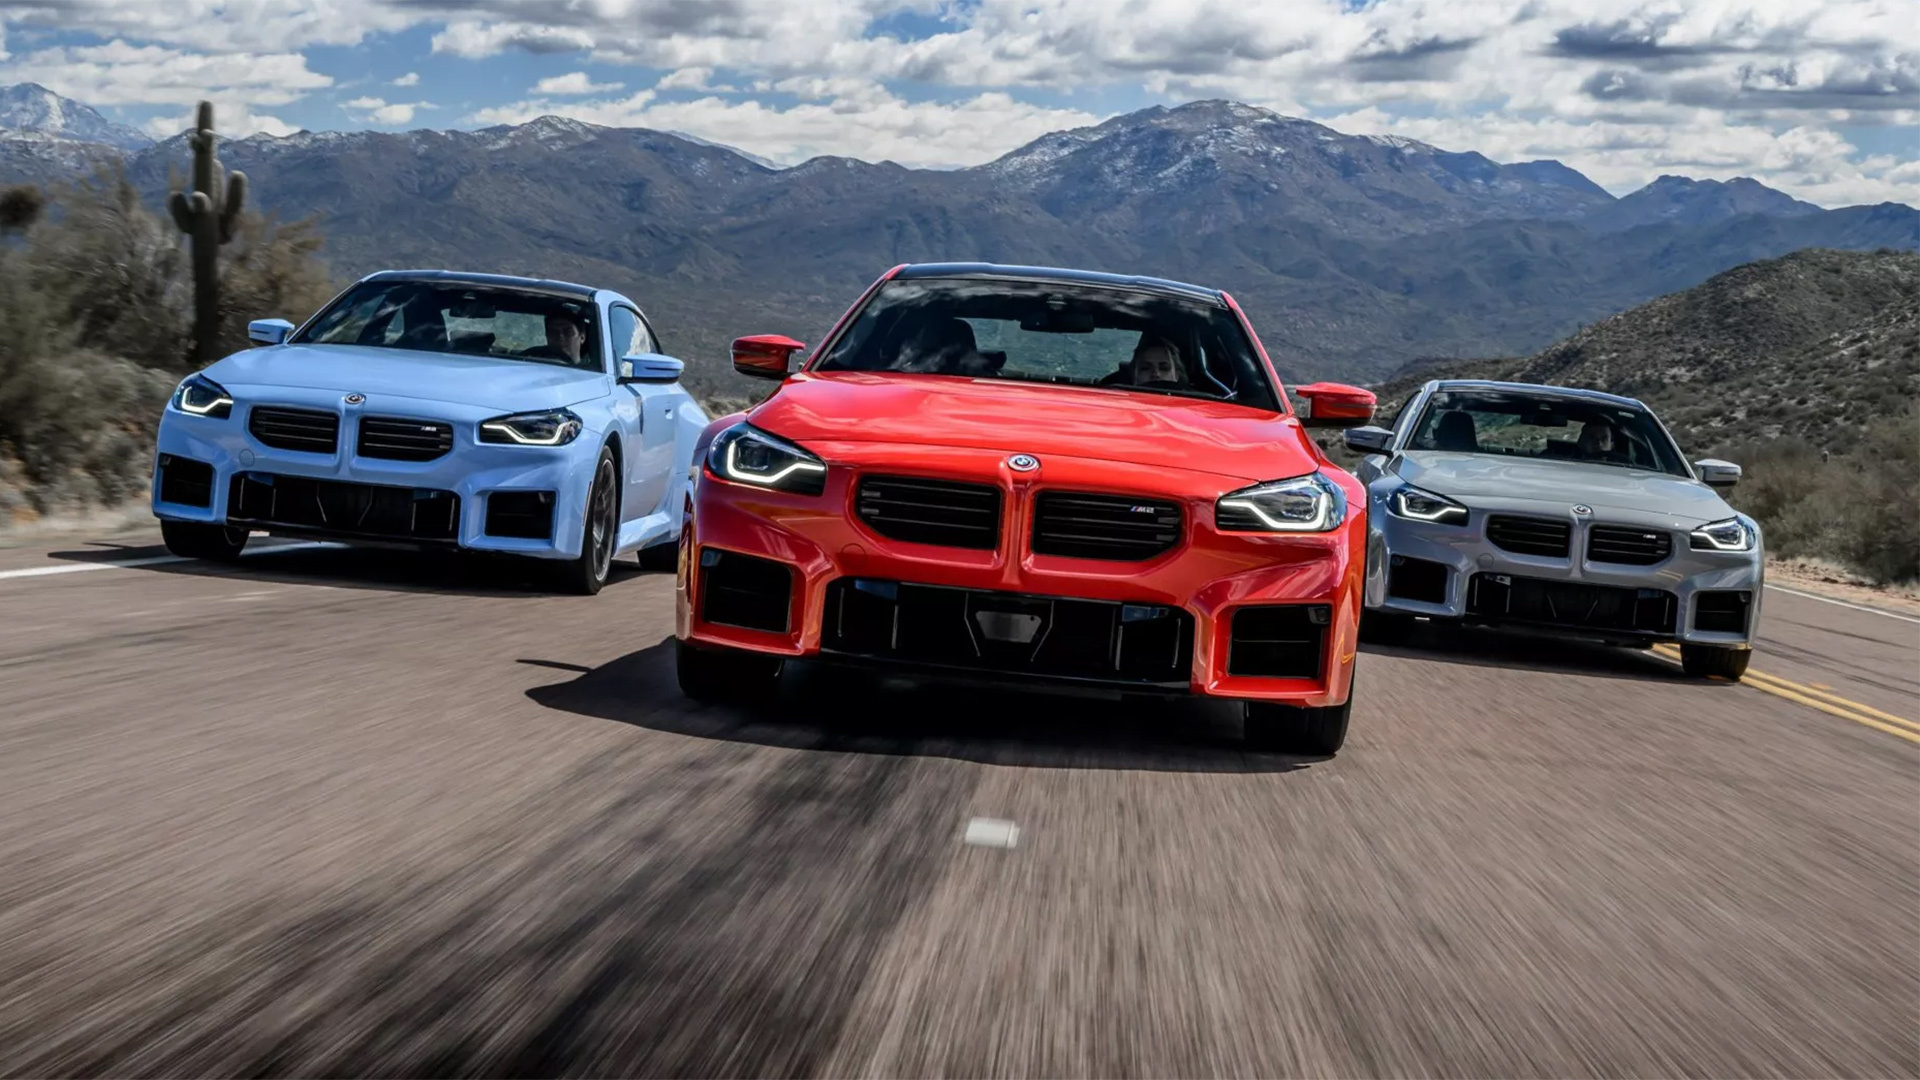 The BMW F87 M2 Buyer's guide